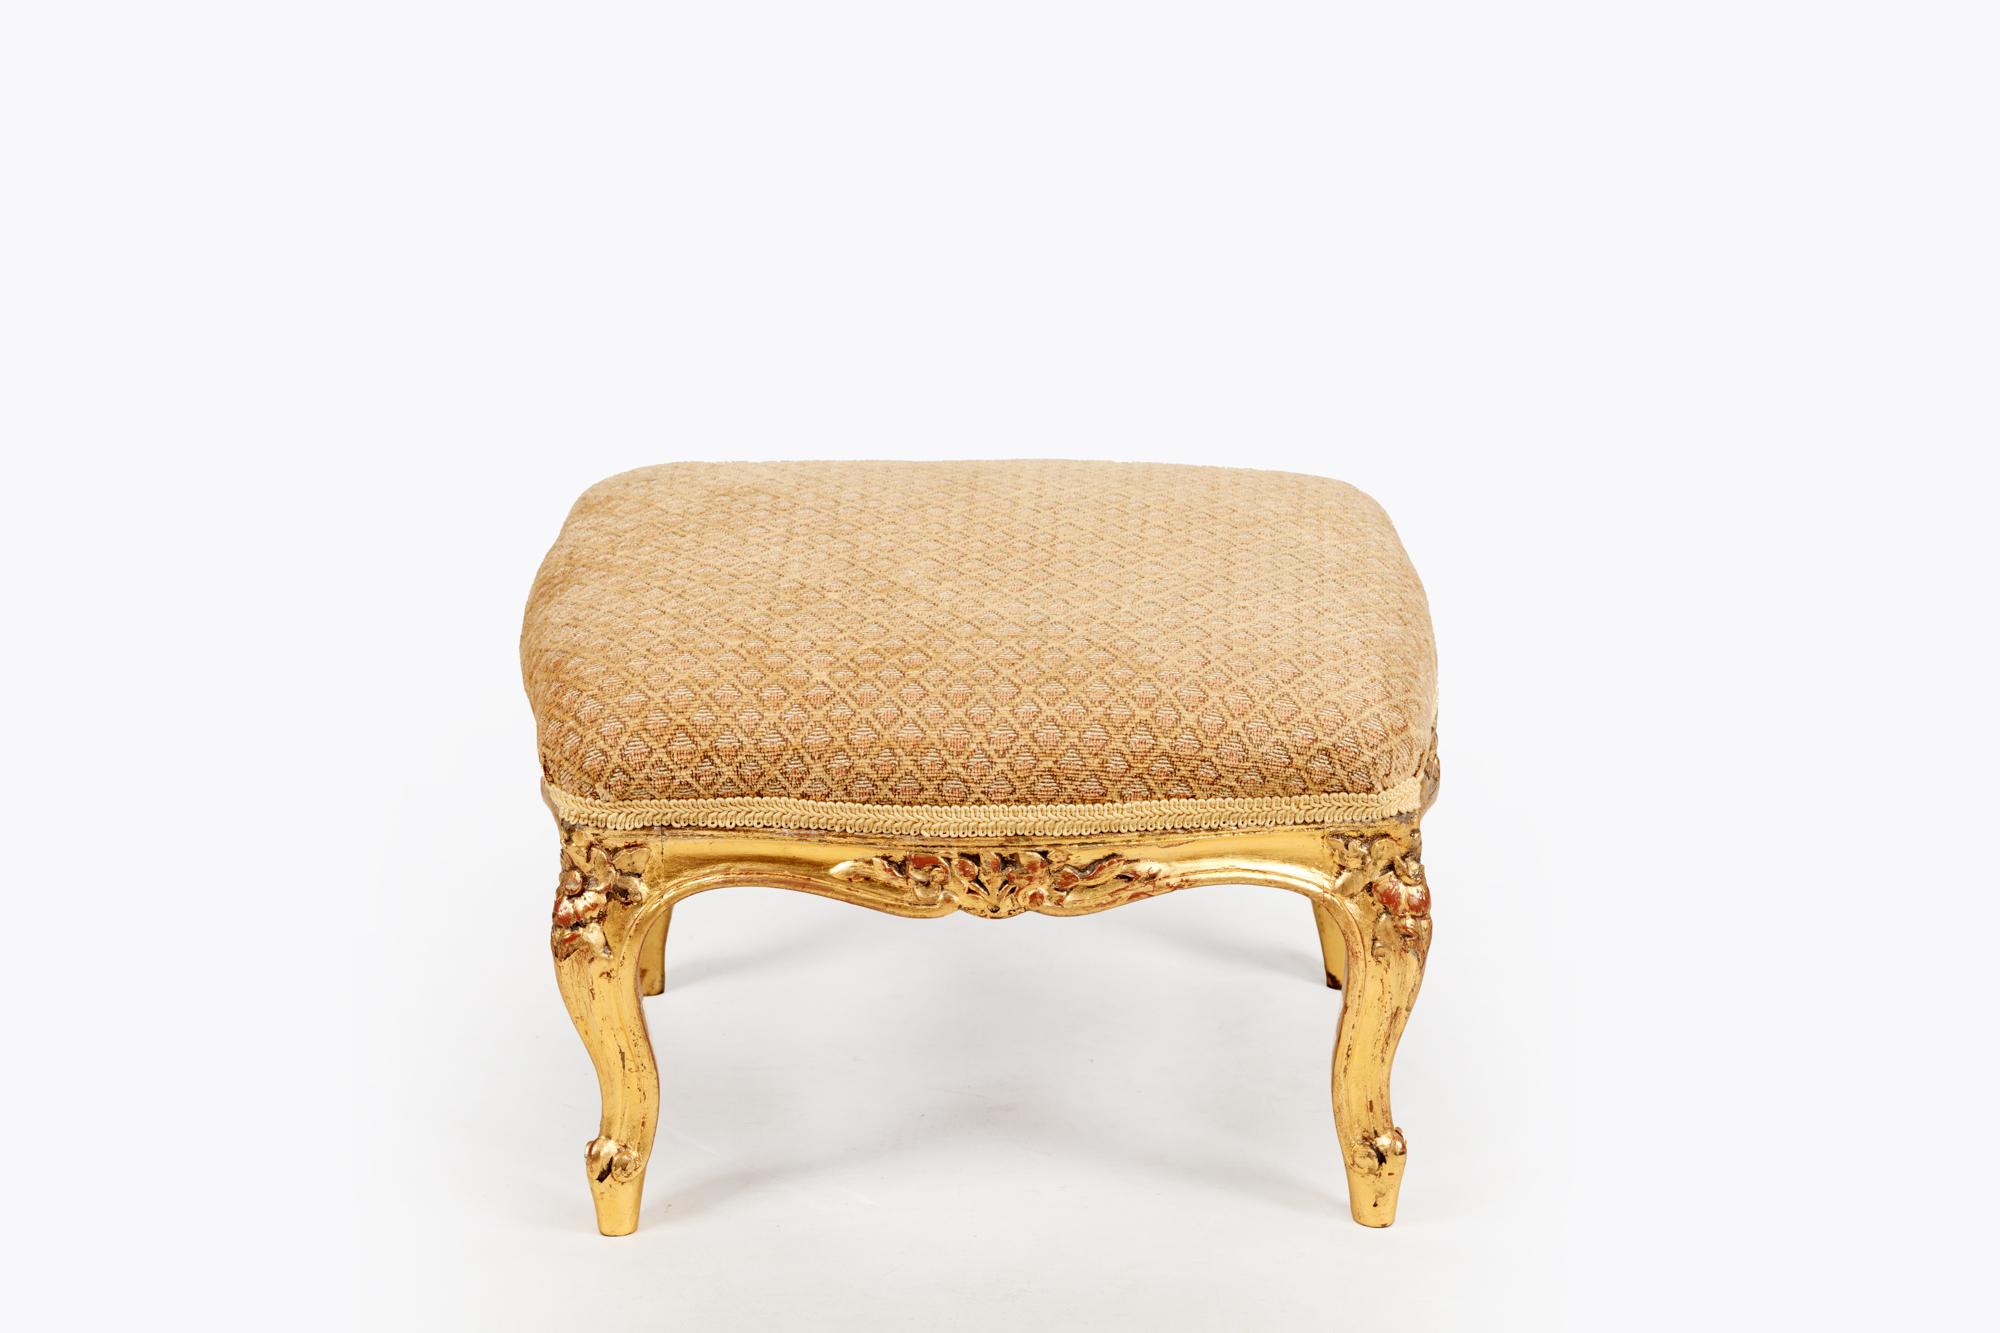 Pair Rococo style giltwood tabourets in rectangular form with foliate carving throughout, raised on cabriole legs terminating on scrolled feet over intricate bow aprons. These stools have a rich gilt patinated finish which is trimmed by decorative